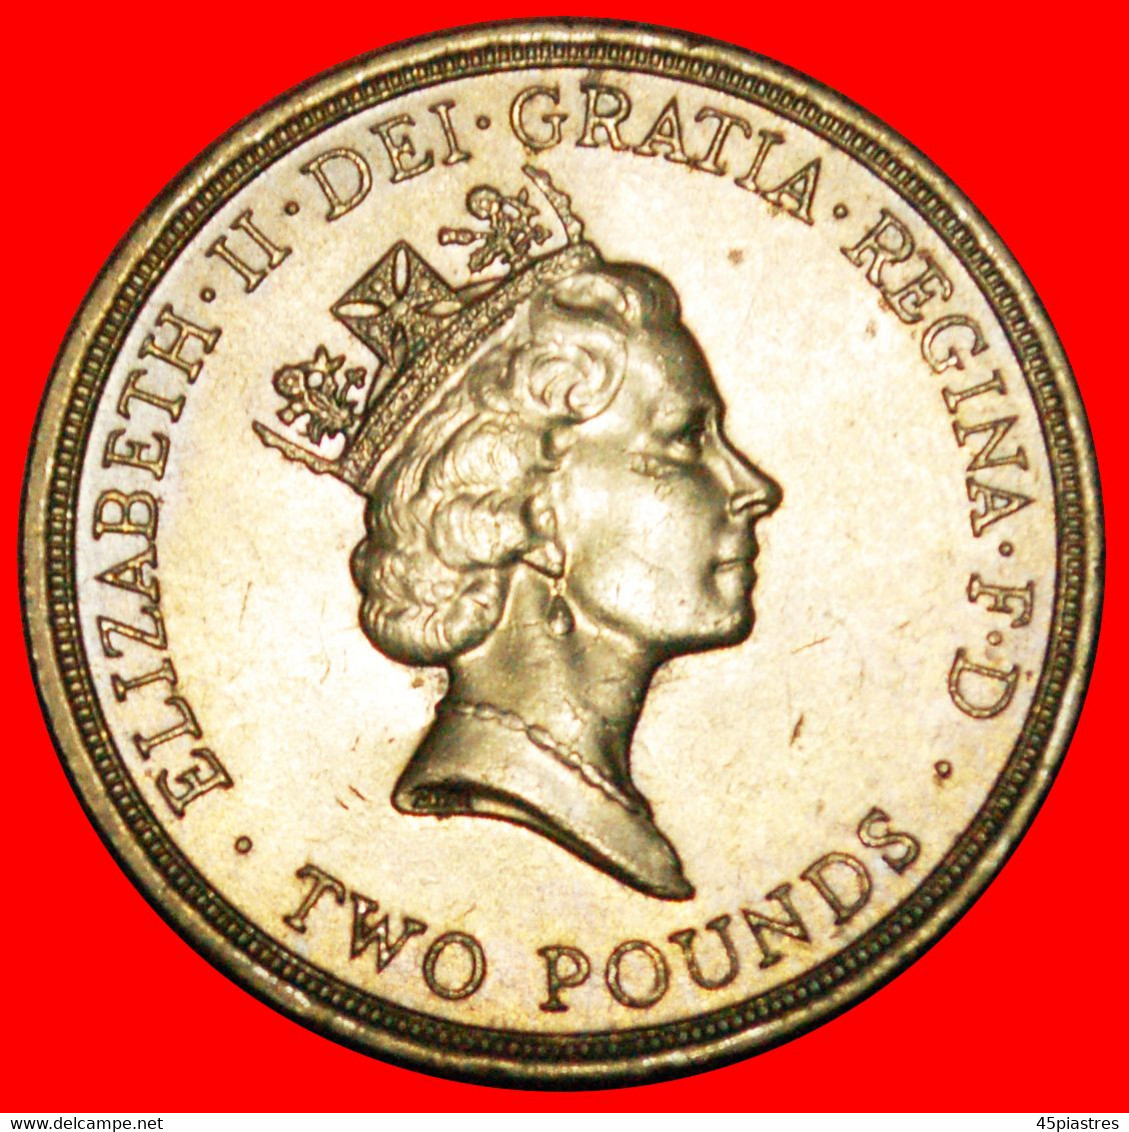 • THISTLE: GREAT BRITAIN ★ 2 POUNDS 1986! LOW START ★ NO RESERVE! - Maundy Sets & Commemorative